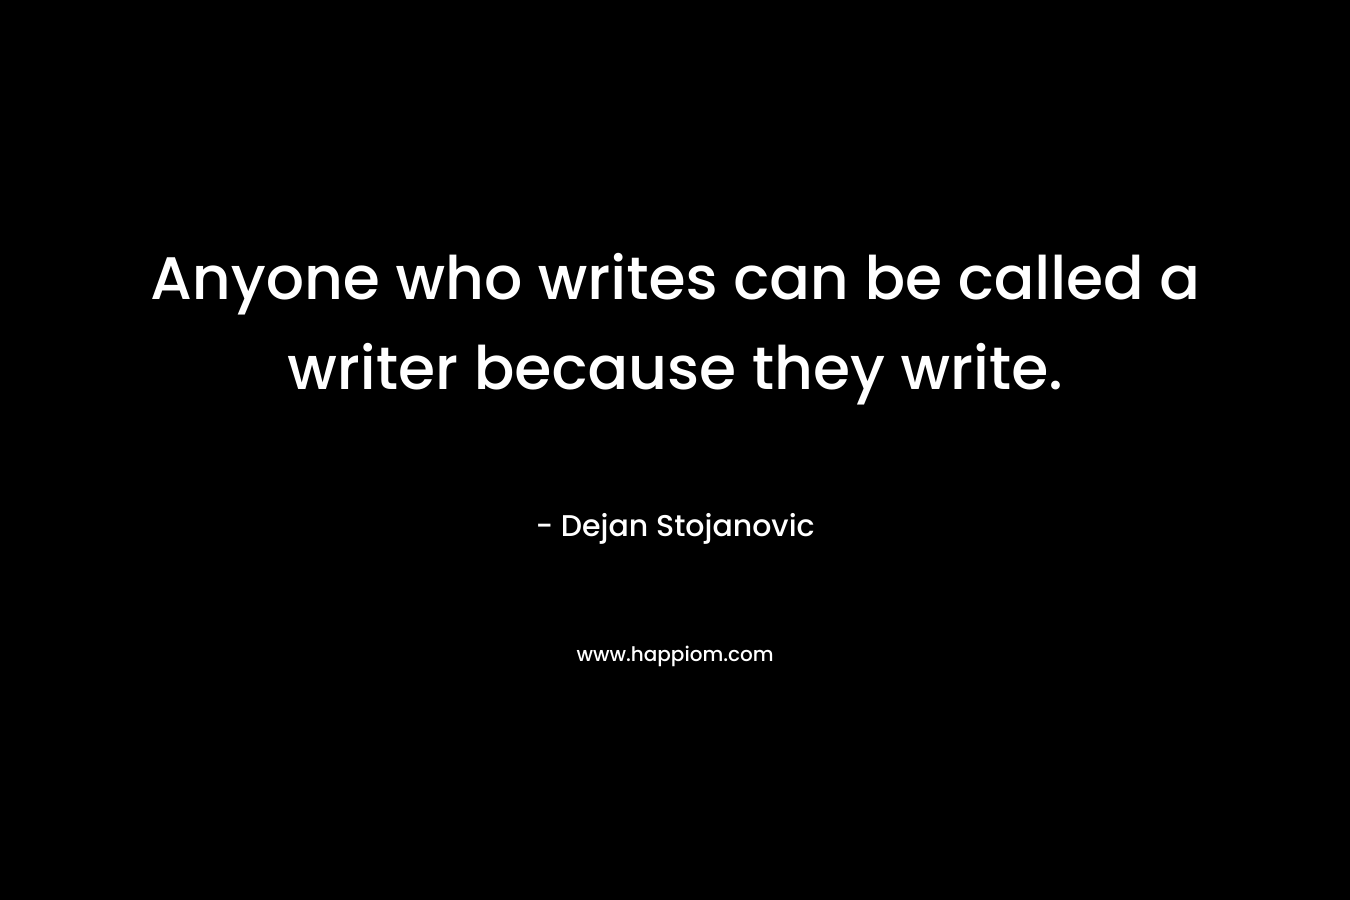 Anyone who writes can be called a writer because they write. – Dejan Stojanovic